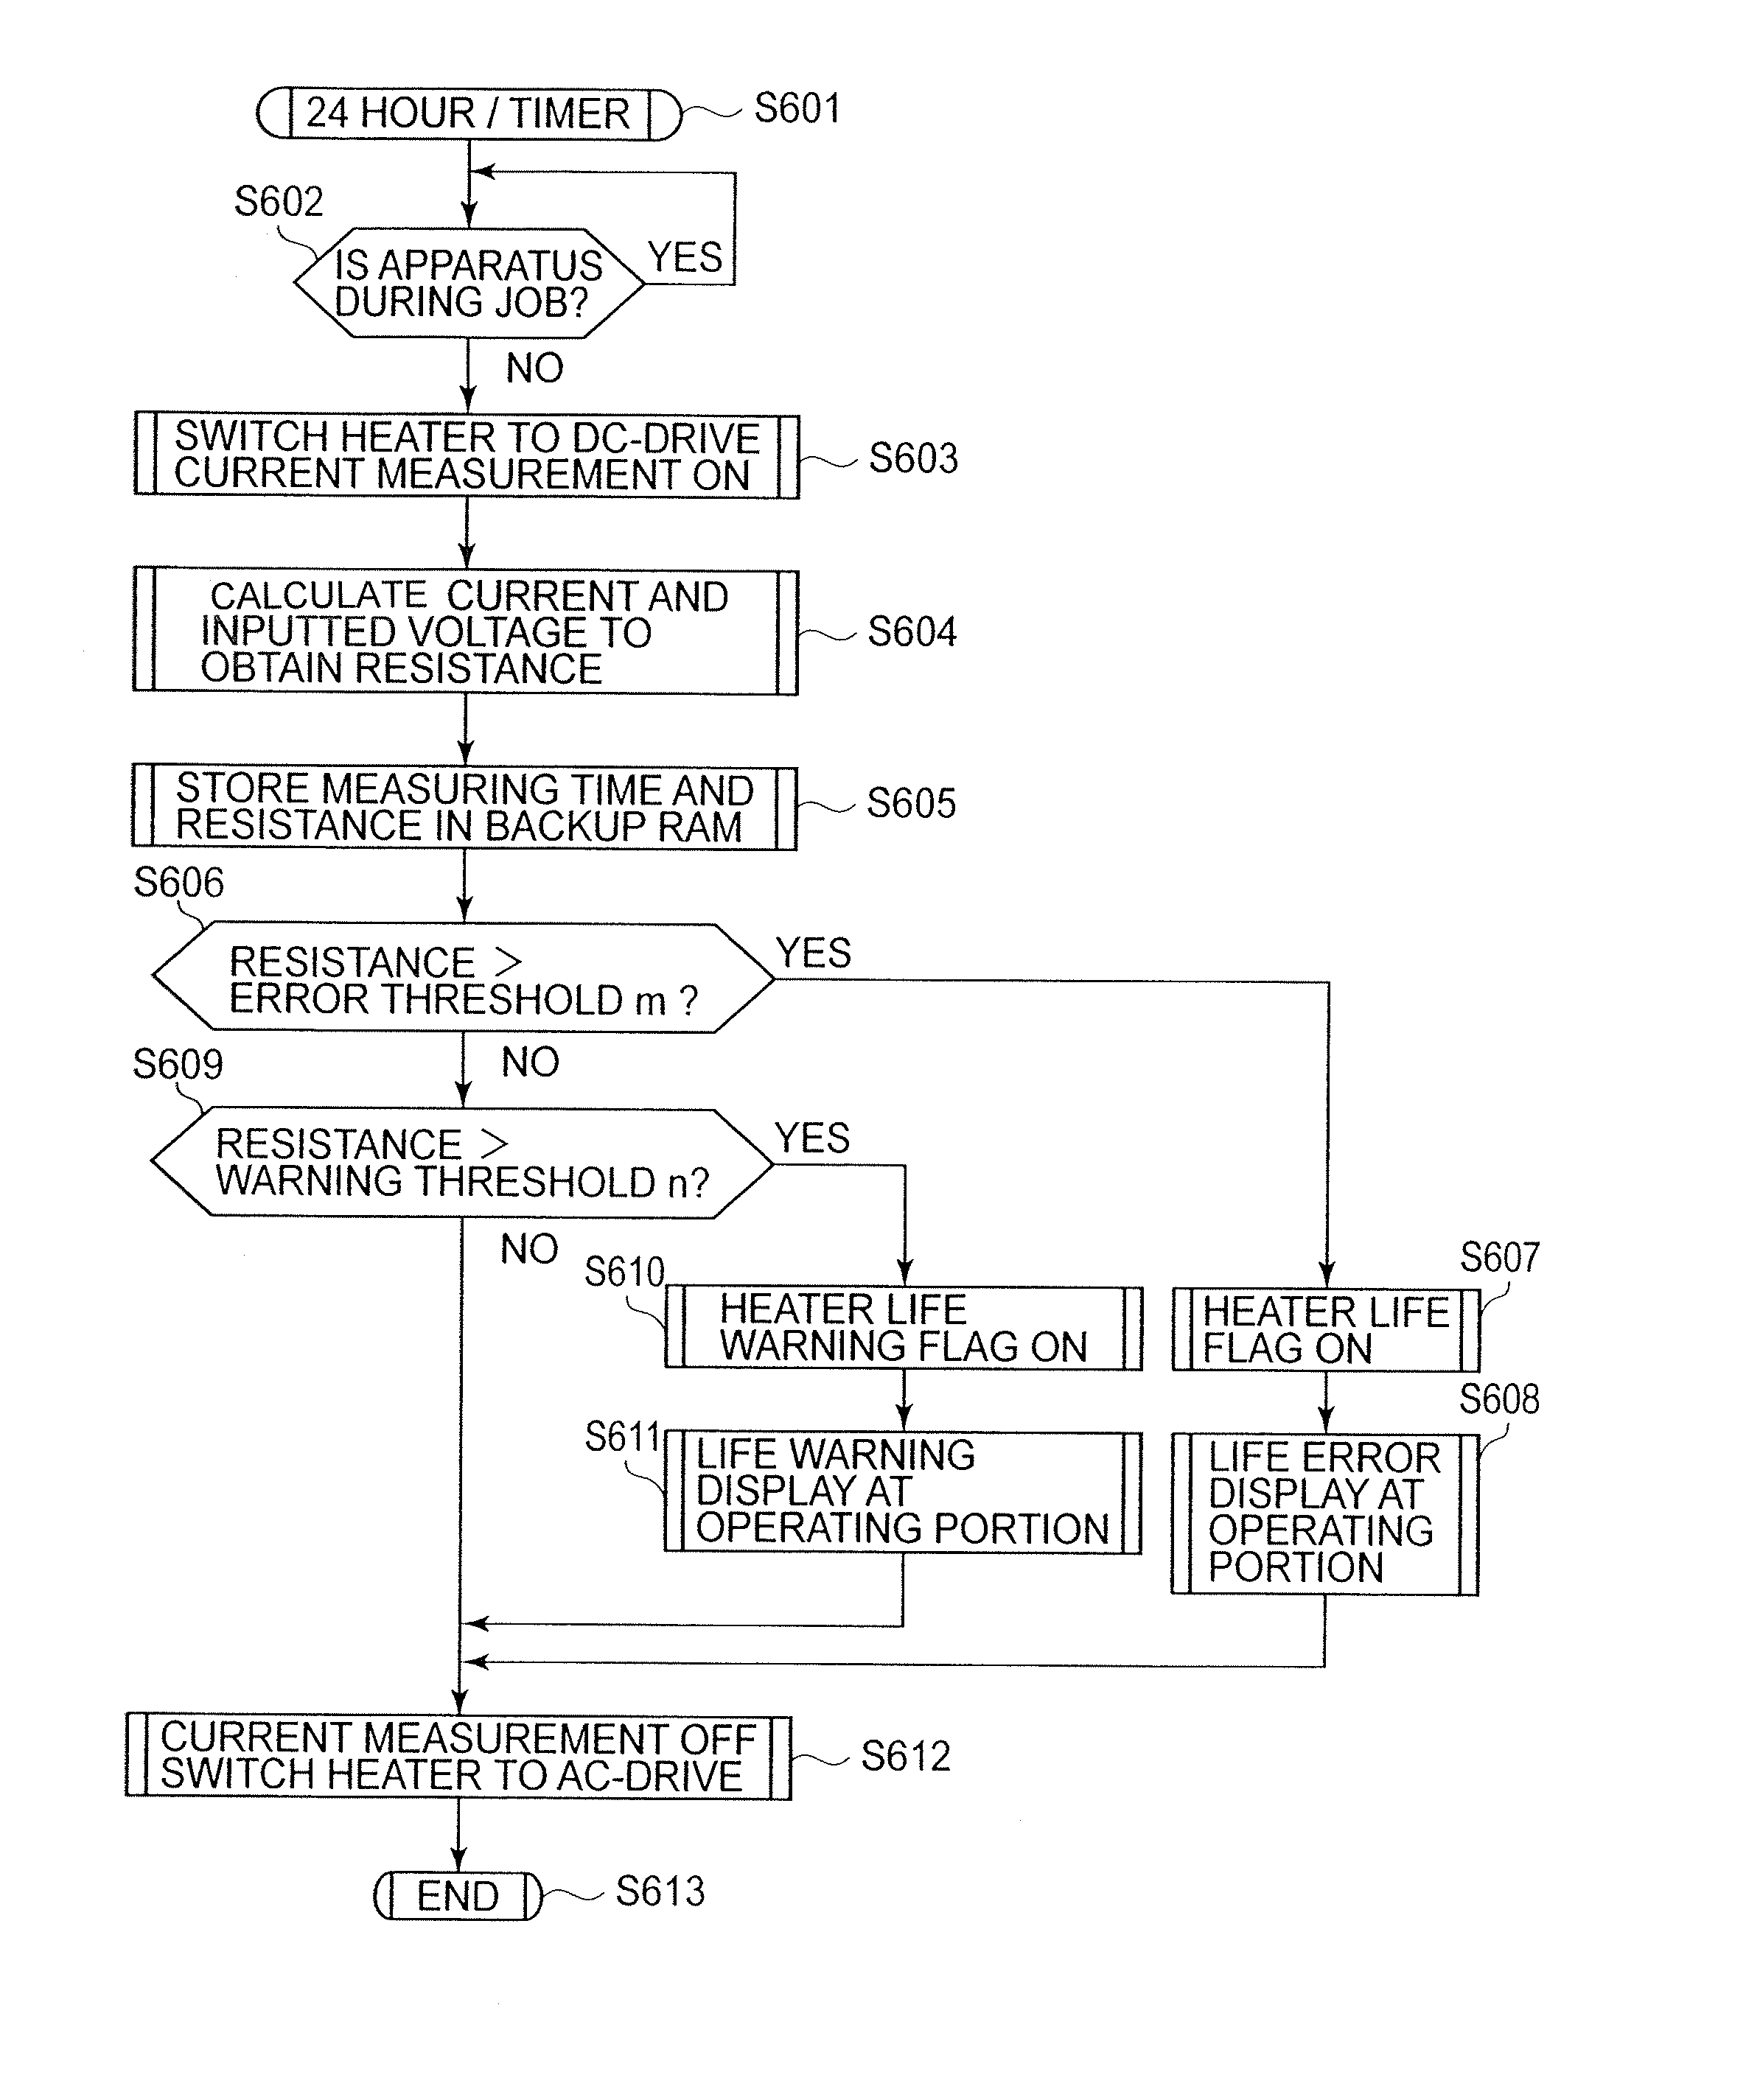 Image forming apparatus with carbon based fixing material